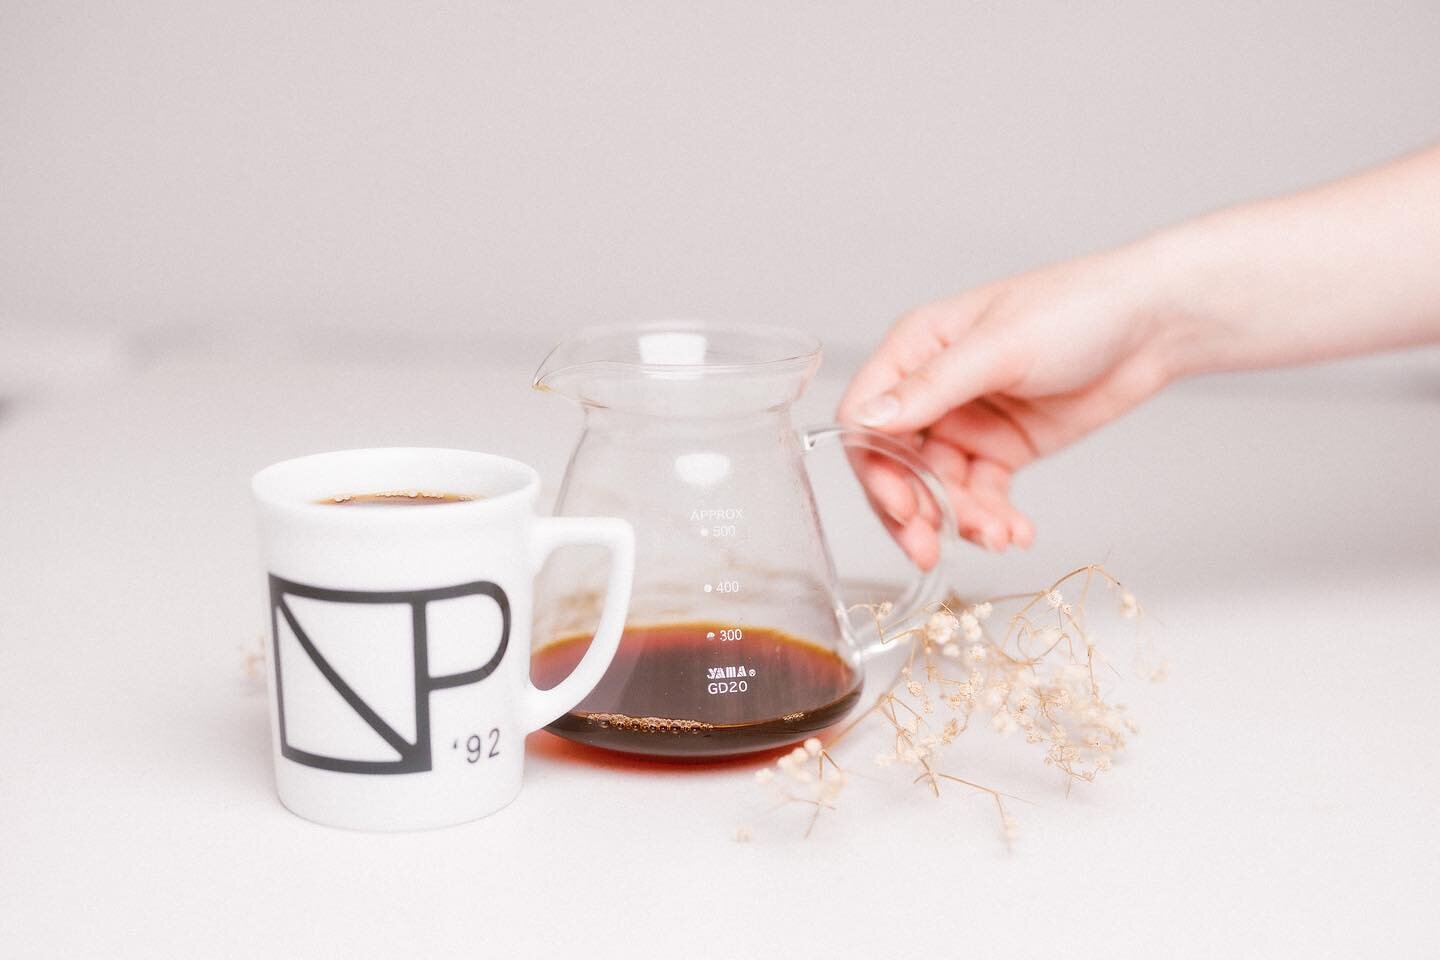 Our team gets really excited about making high-quality coffee accessible to everyone. Swipe through to see some of our favorite equipment that will help you make cafe-quality coffee at home. All of us at Newport are always looking for a chance to cha